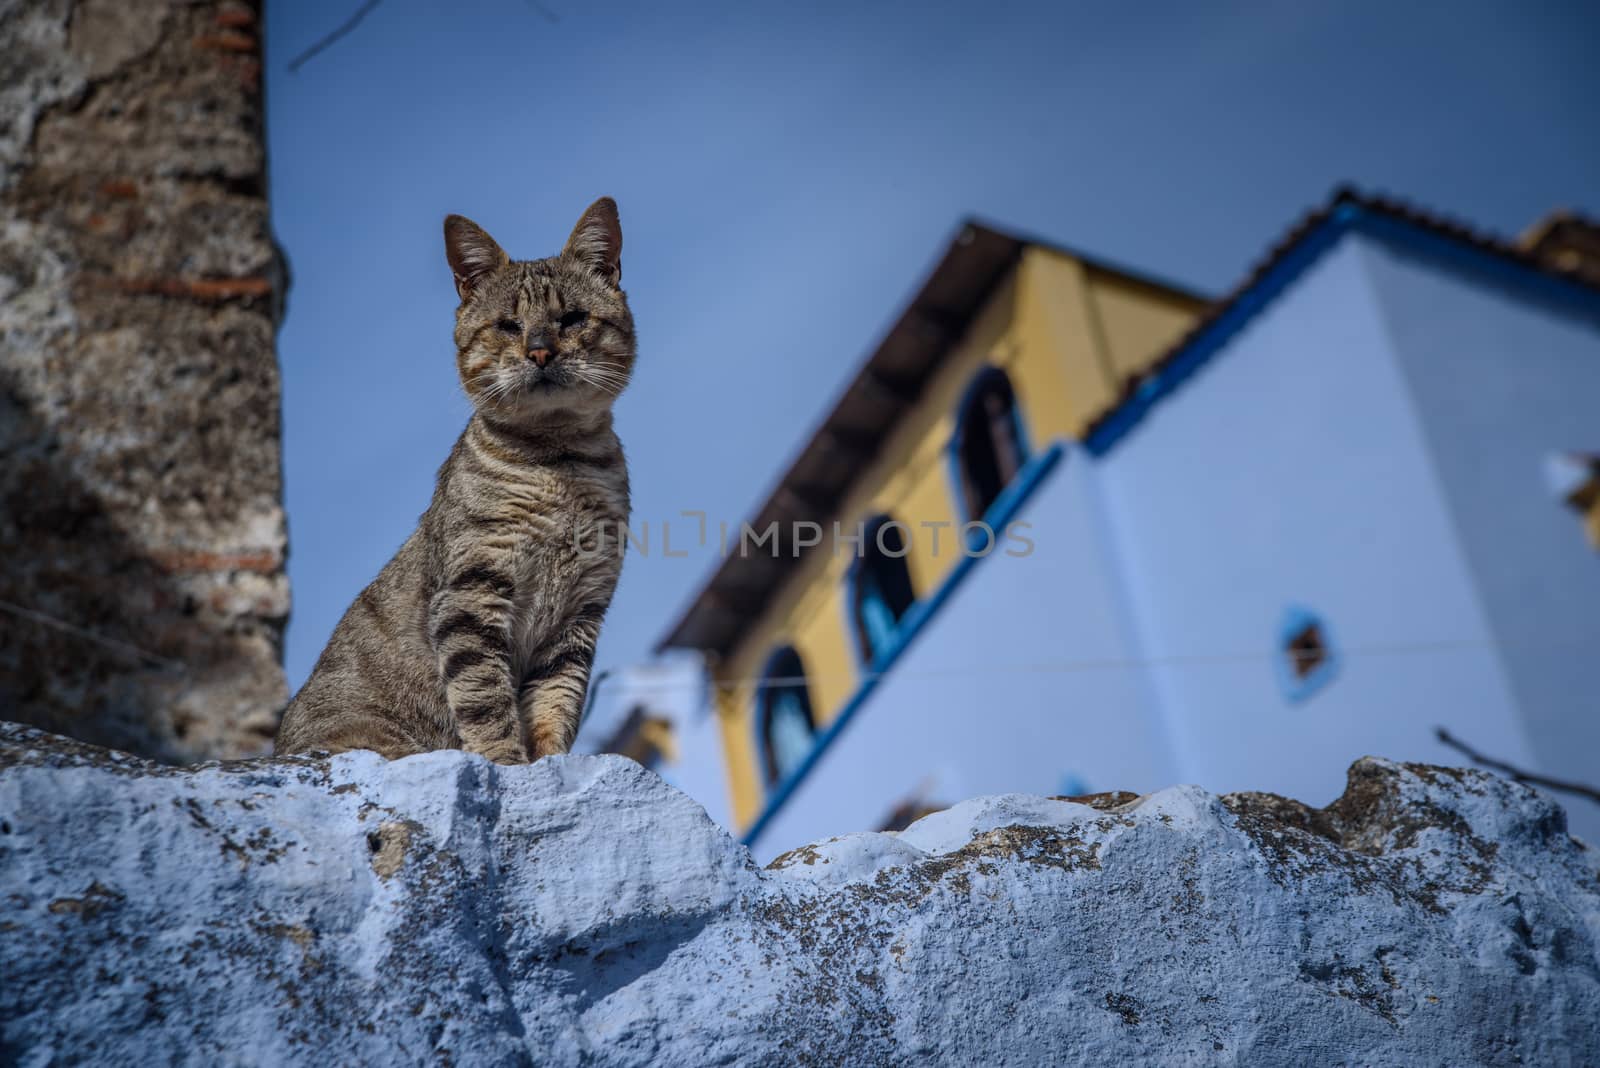 Cat in Chefchaouen, the blue city in the Morocco. by johnnychaos